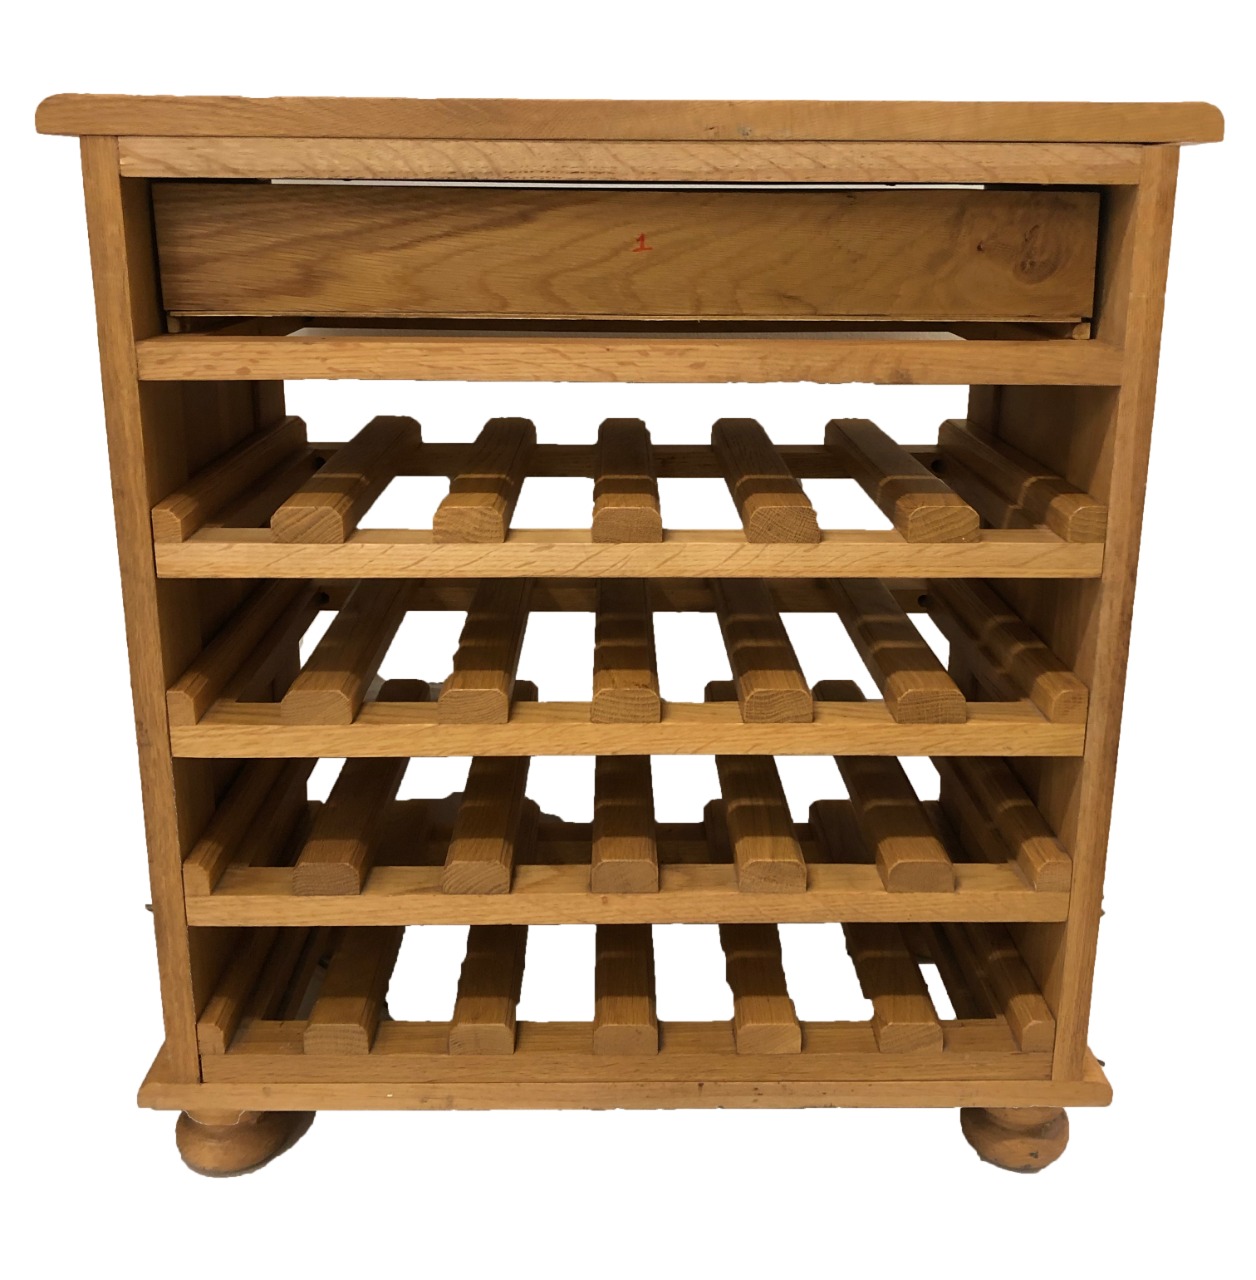 Wooden 24 Place Wine Rack for Sale!